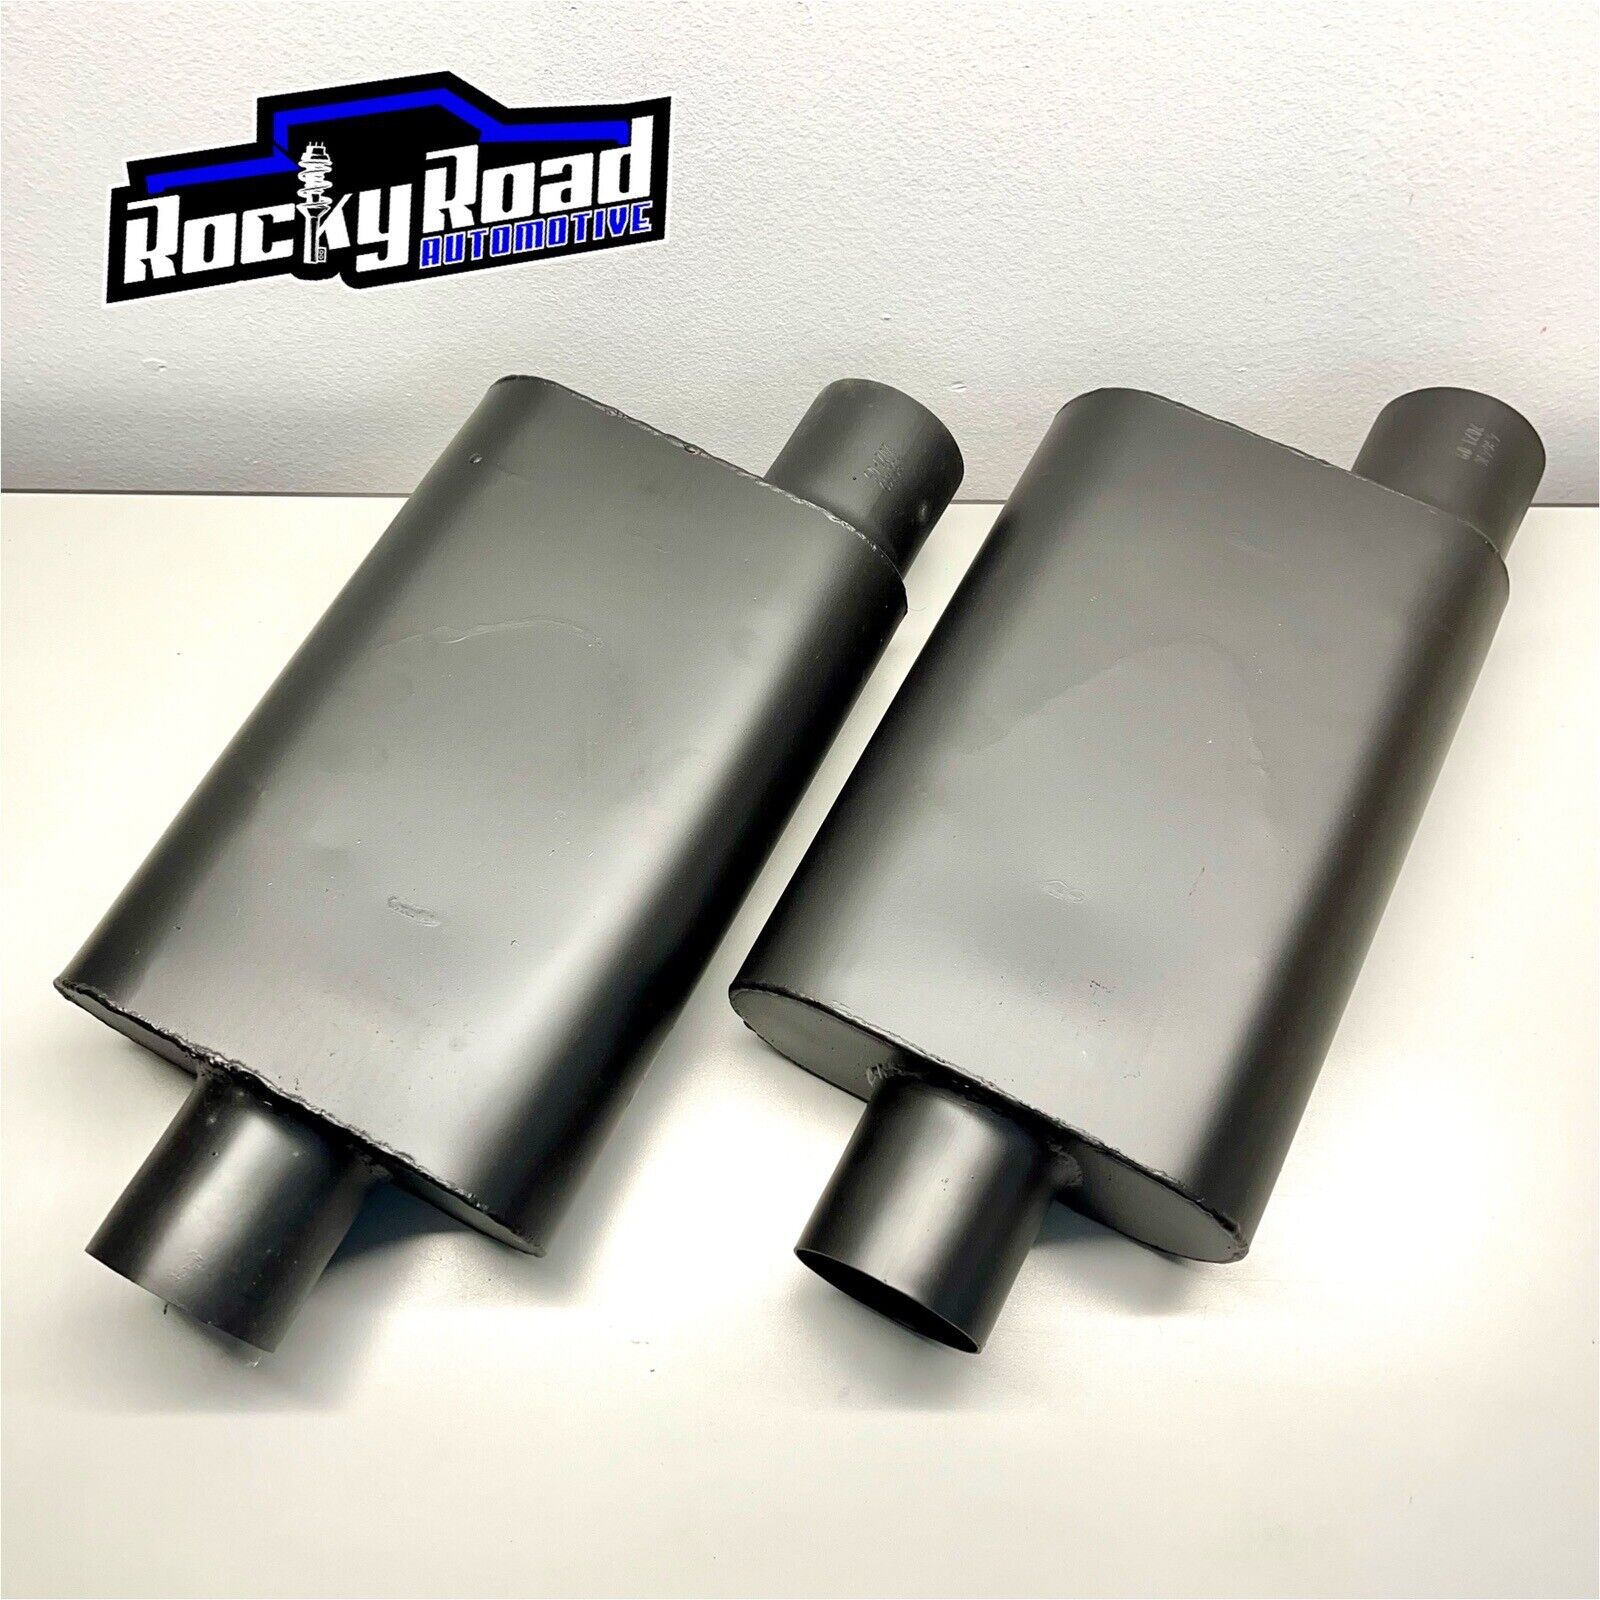 2 Performance Exhaust Mufflers 19 x 3 Inches Aluminized Steel SpeedFX (PAIR)